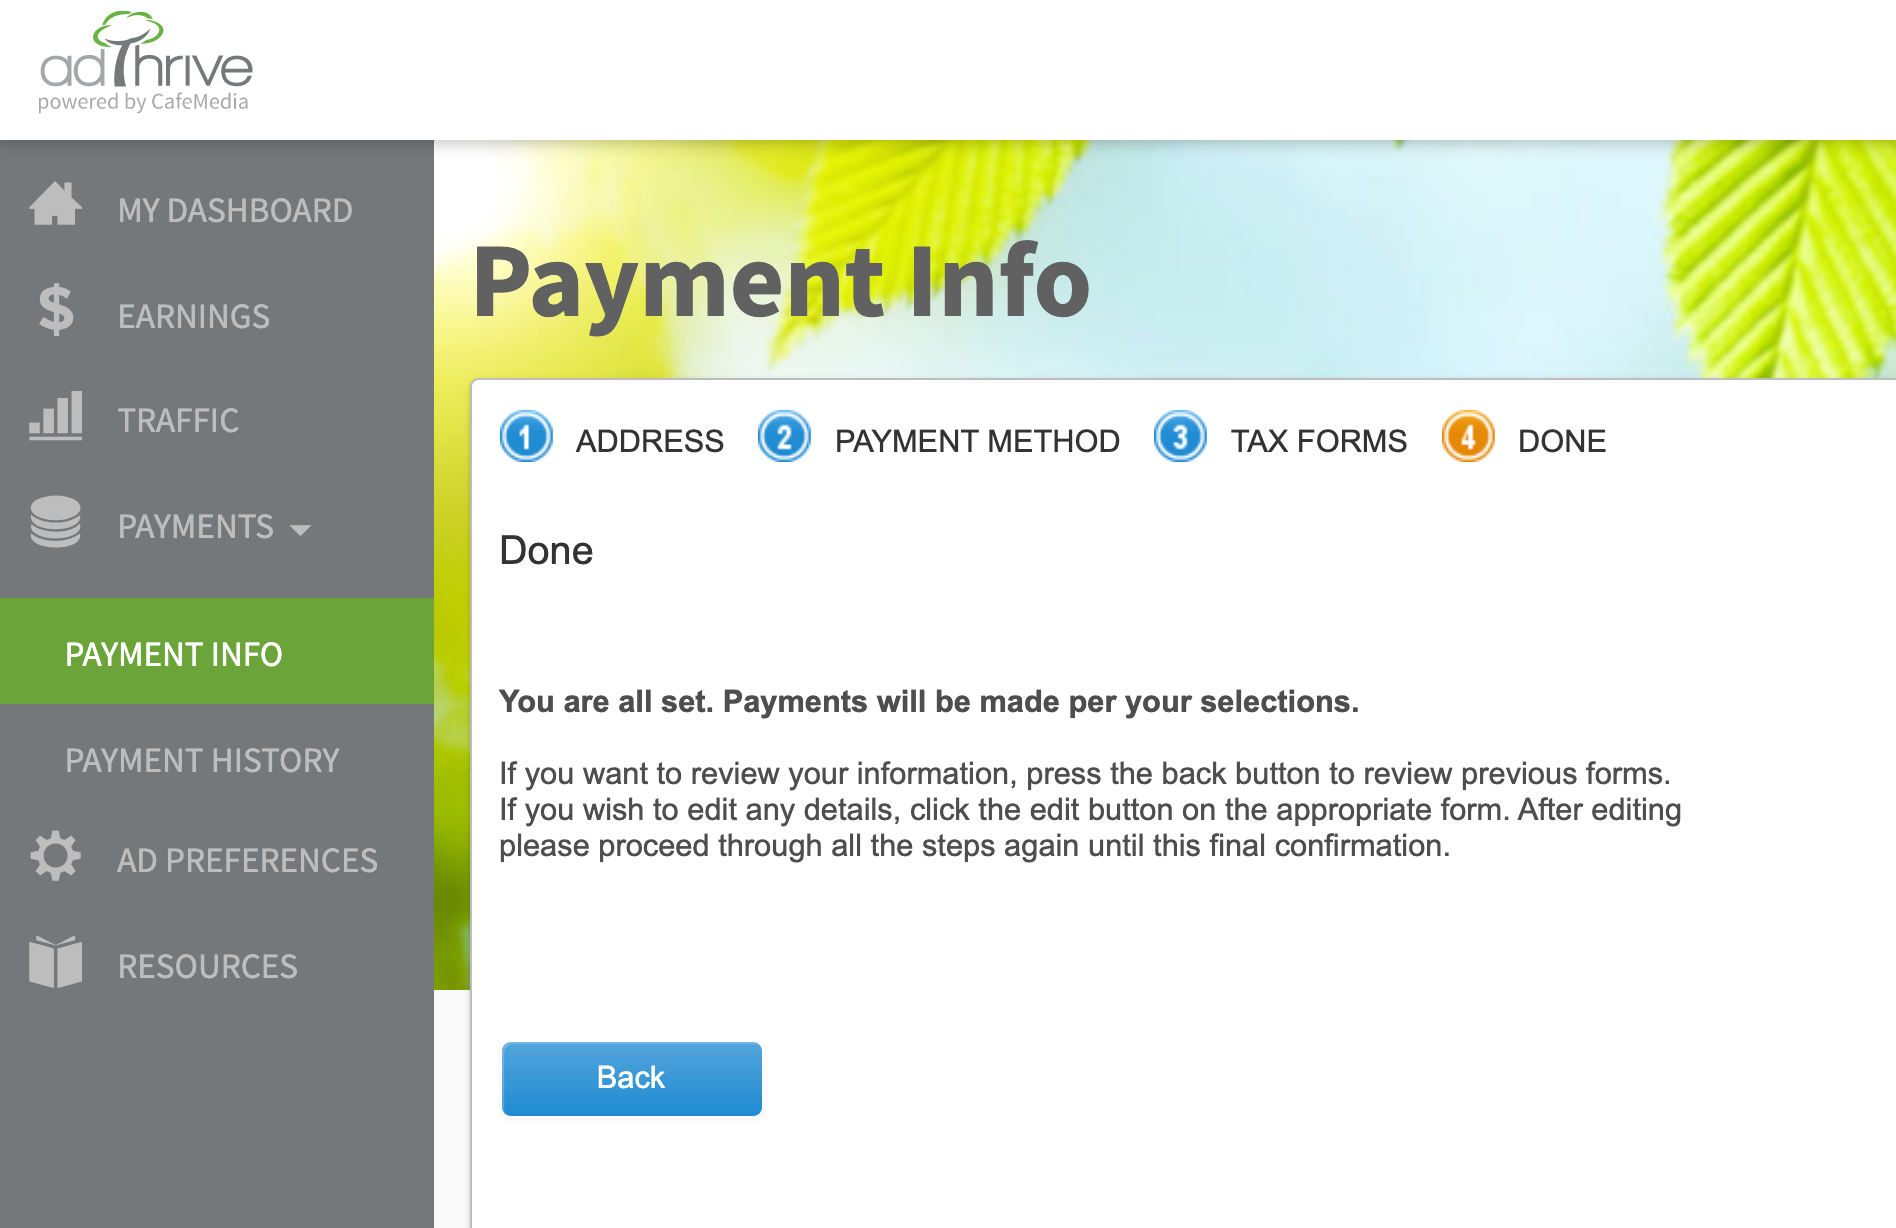 AdThrive_payment_info_complete.png